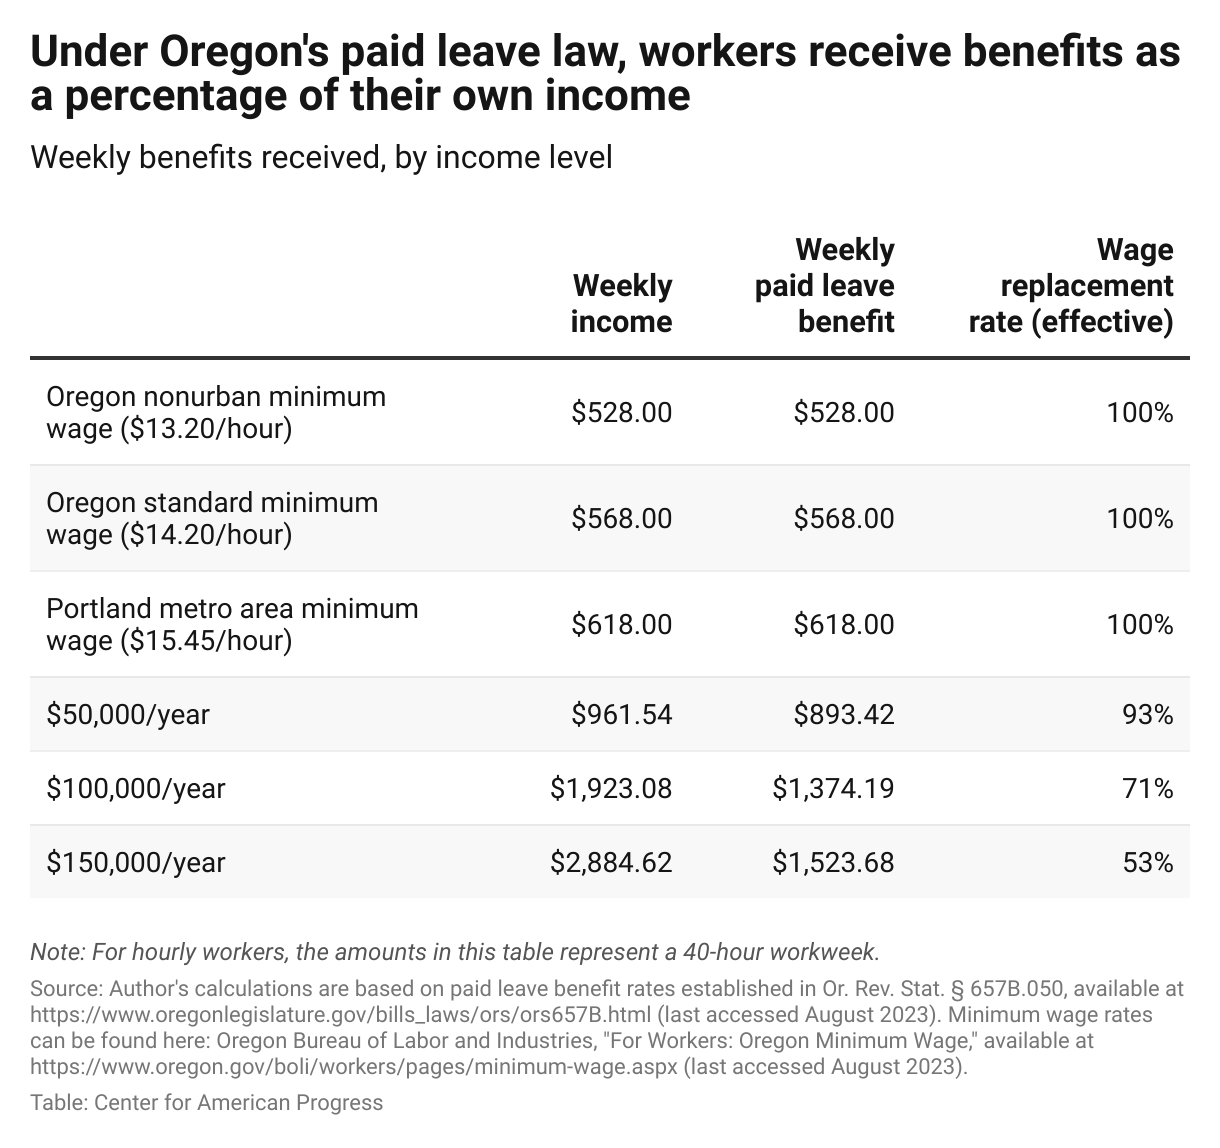 Table showing examples of weekly benefits and effective wage replacement rates for workers at different income levels under Oregon's paid leave law.